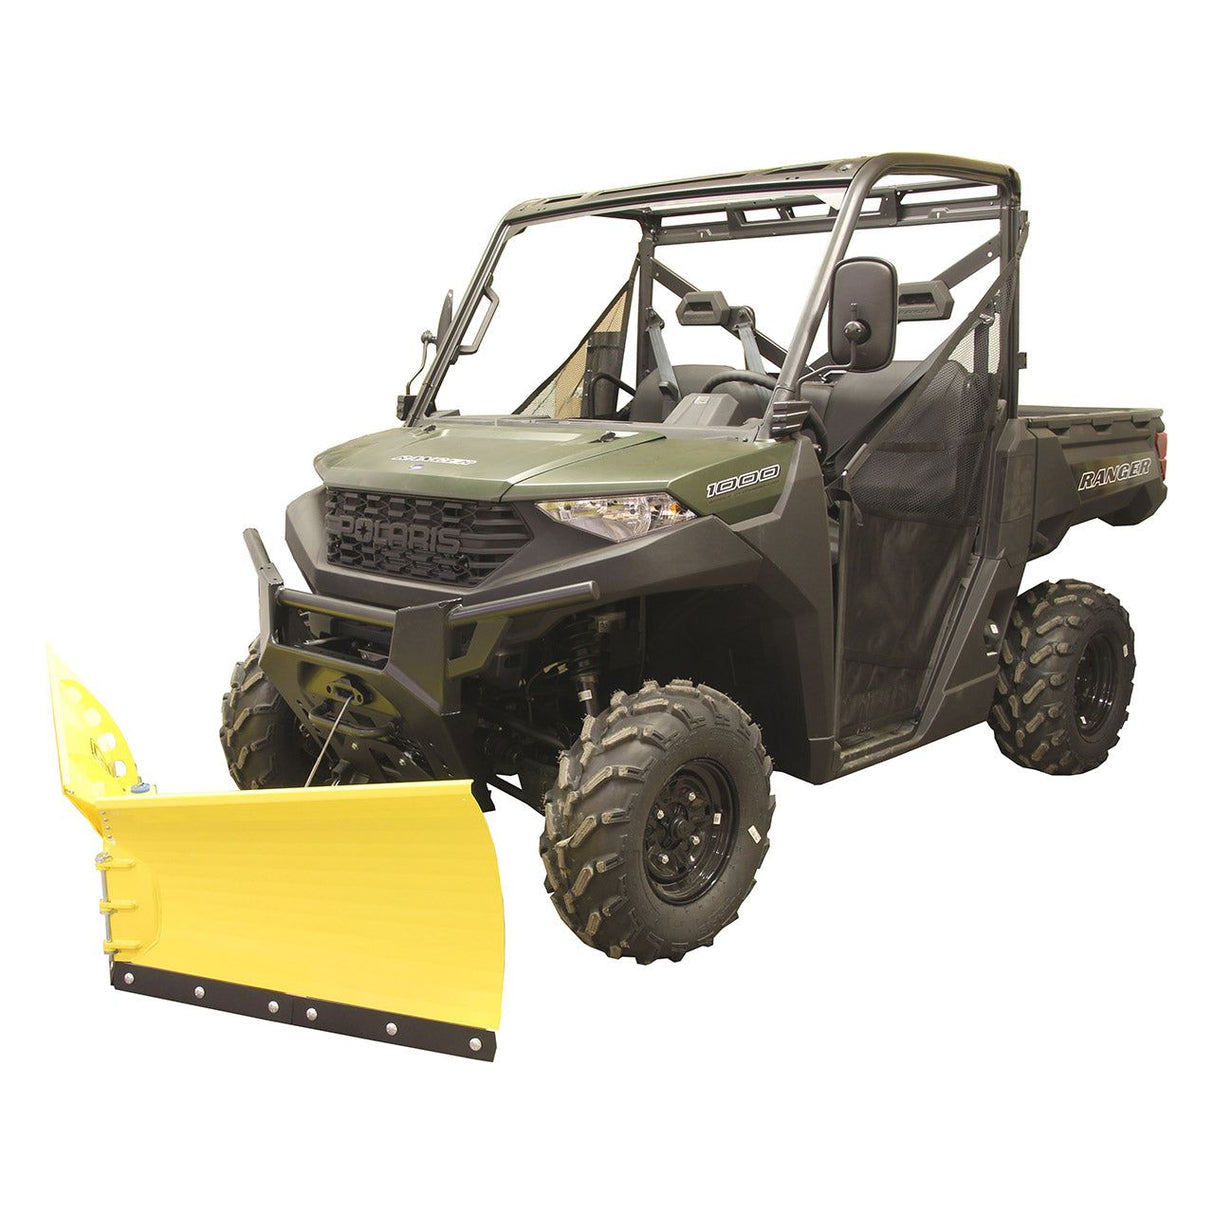 IB Plow package ELECTRIC-HYDRAULIC Front mounted Folding plow G2 180cm UTV